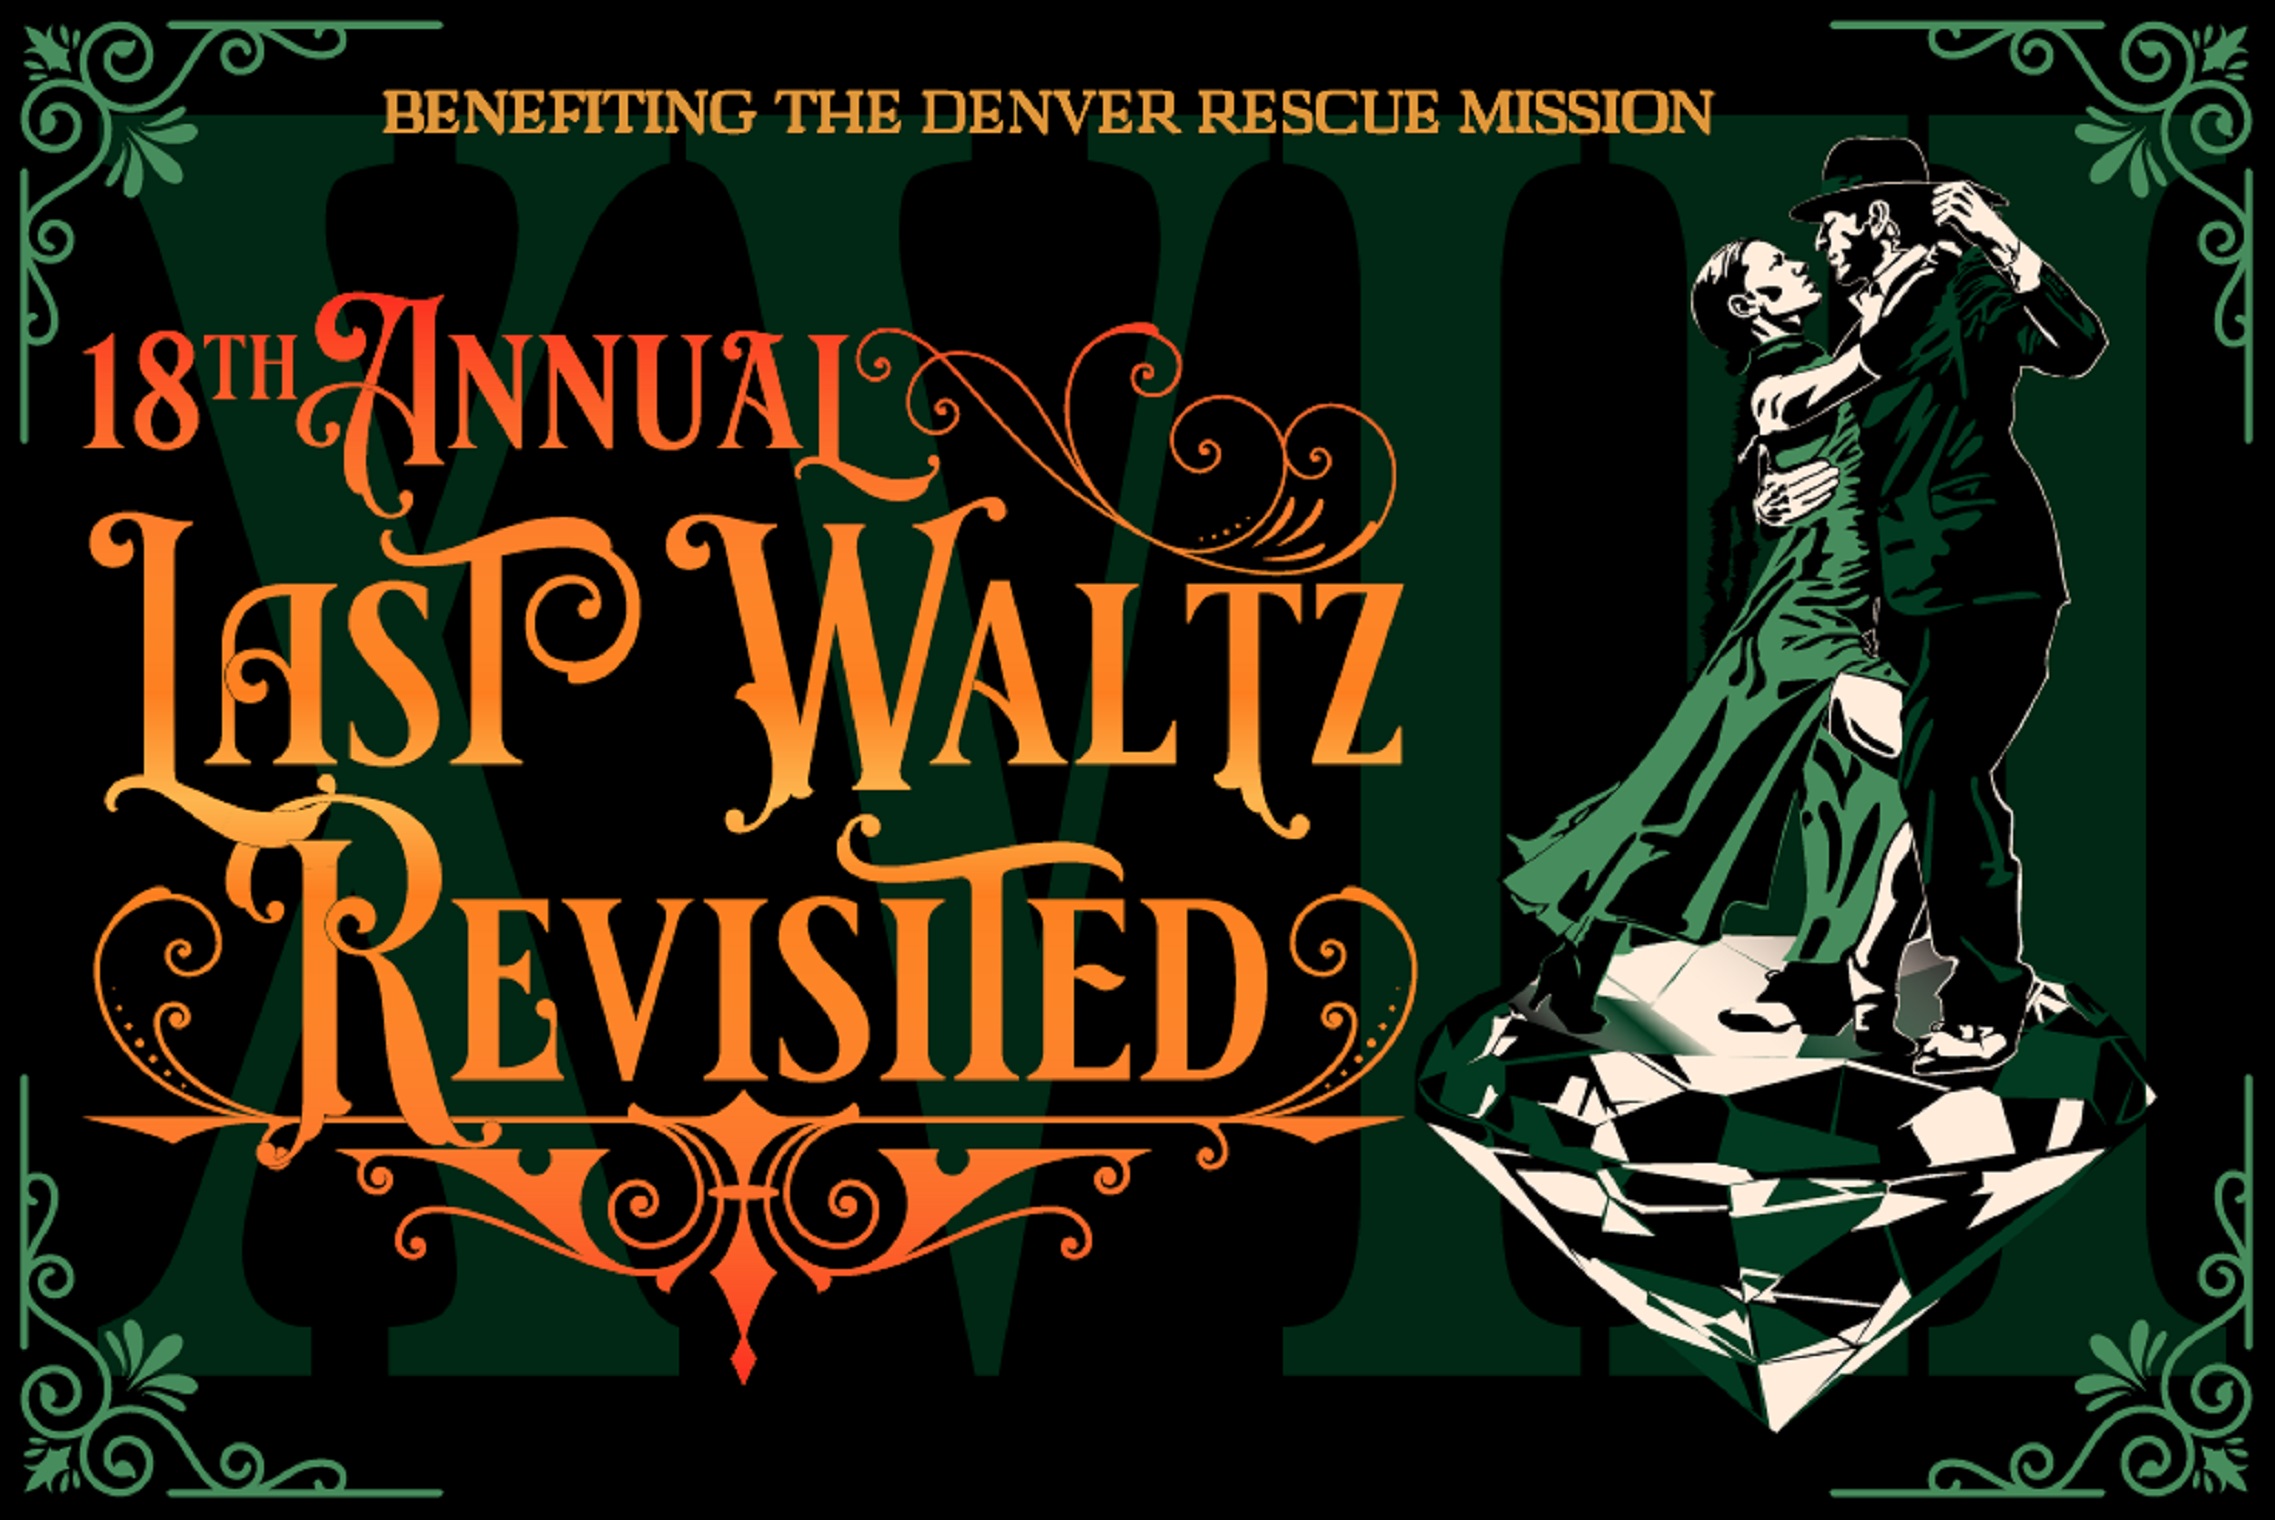 The 18th Annual  LAST WALTZ – Revisited Returns to Boulder Theater - 11/18/22